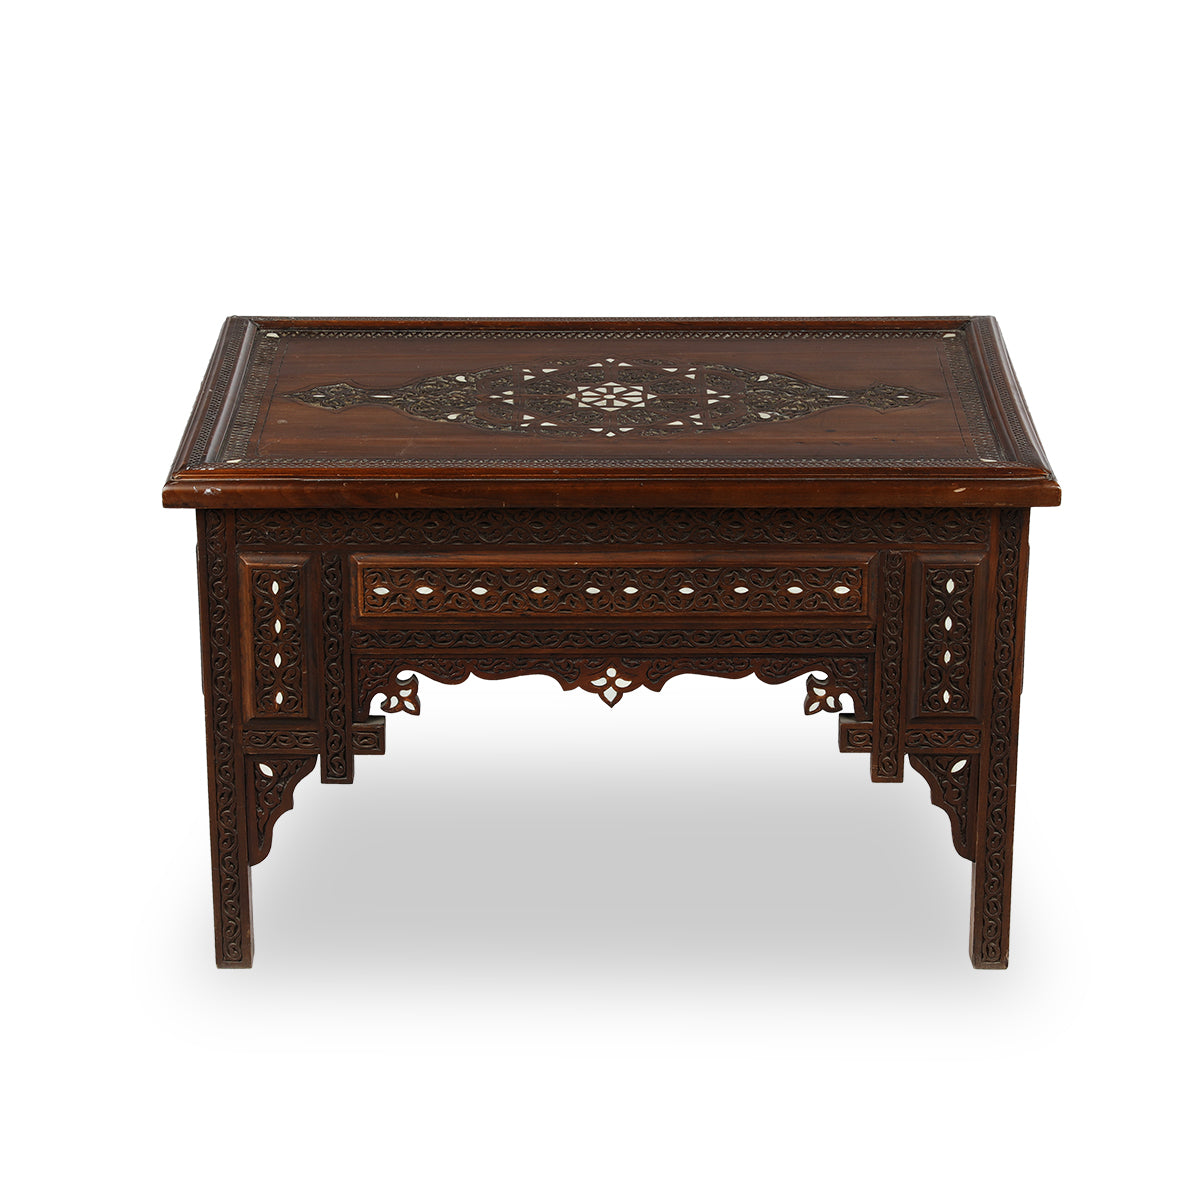 Classic Hand-Carved Solid Wood Table